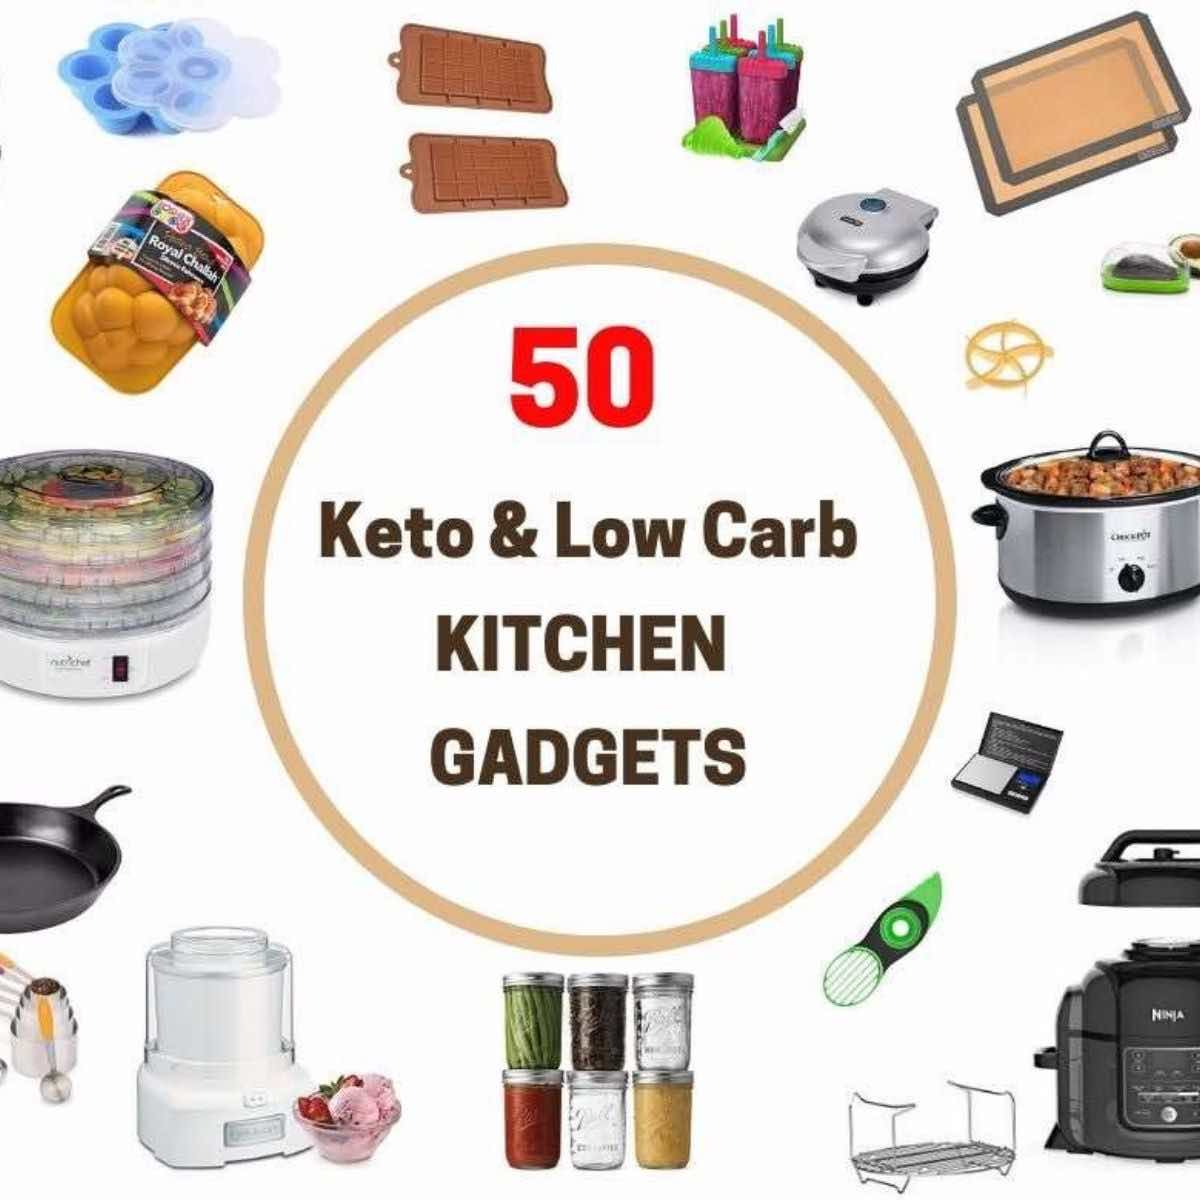 50 kitchen gadgets for keto cooking.